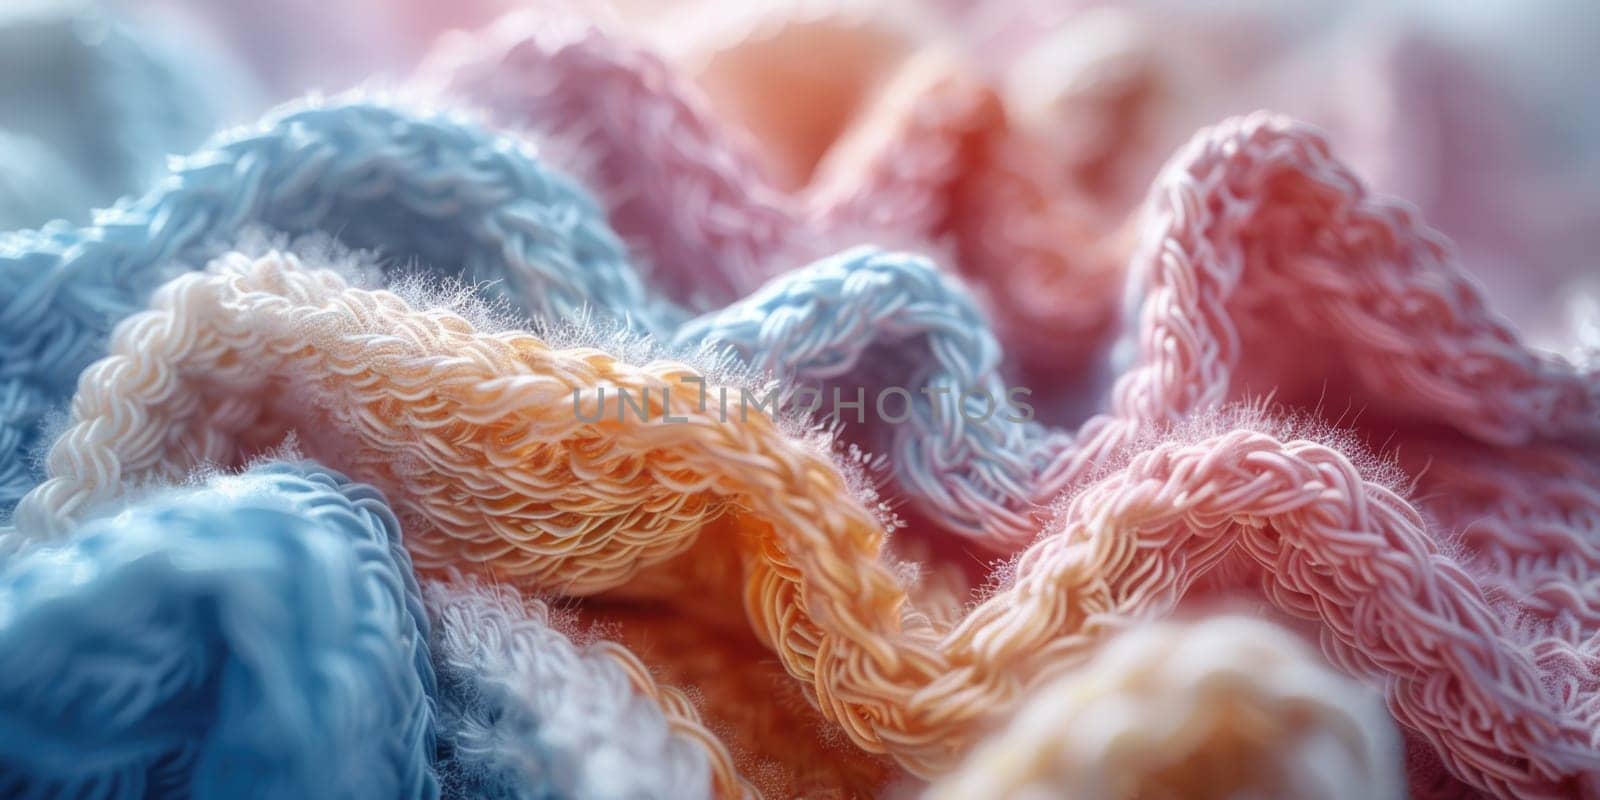 Vibrant Close Up of Colorful Blanket by but_photo